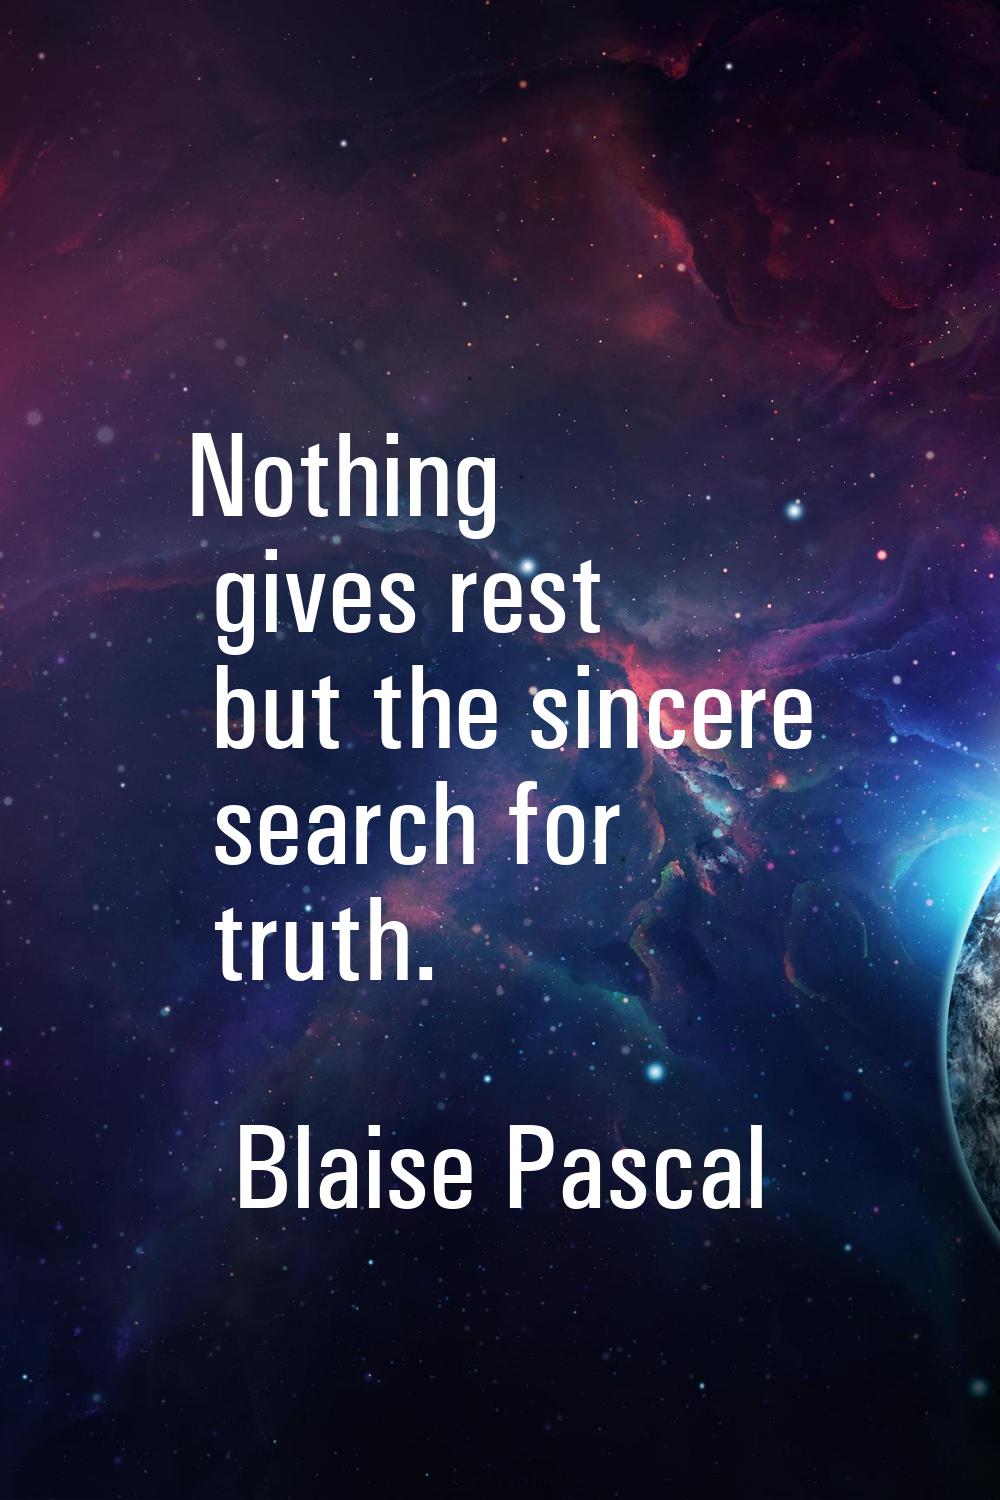 Nothing gives rest but the sincere search for truth.